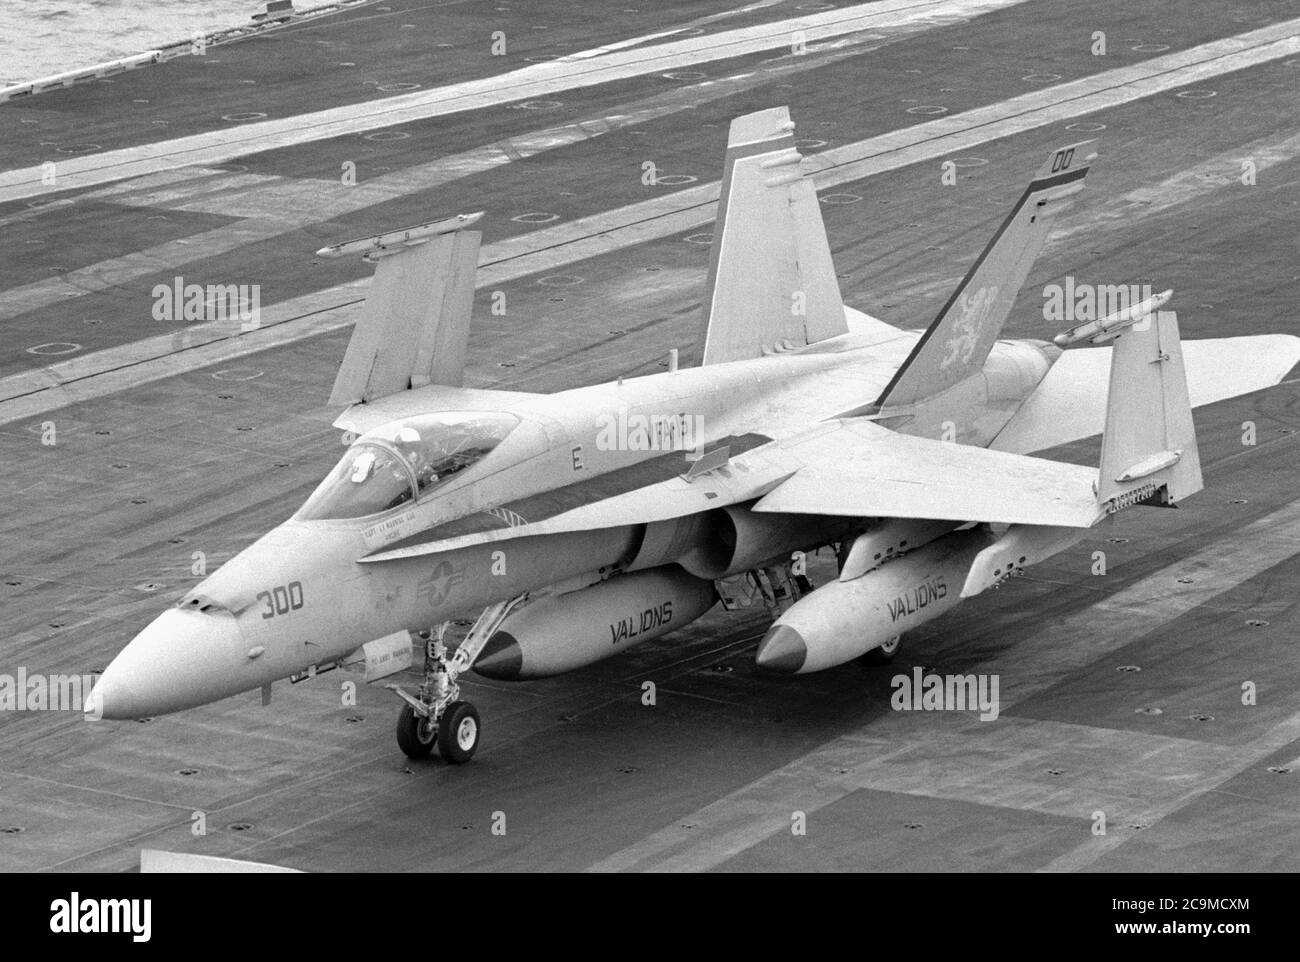 F 18 hornet Black and White Stock Photos & Images - Alamy